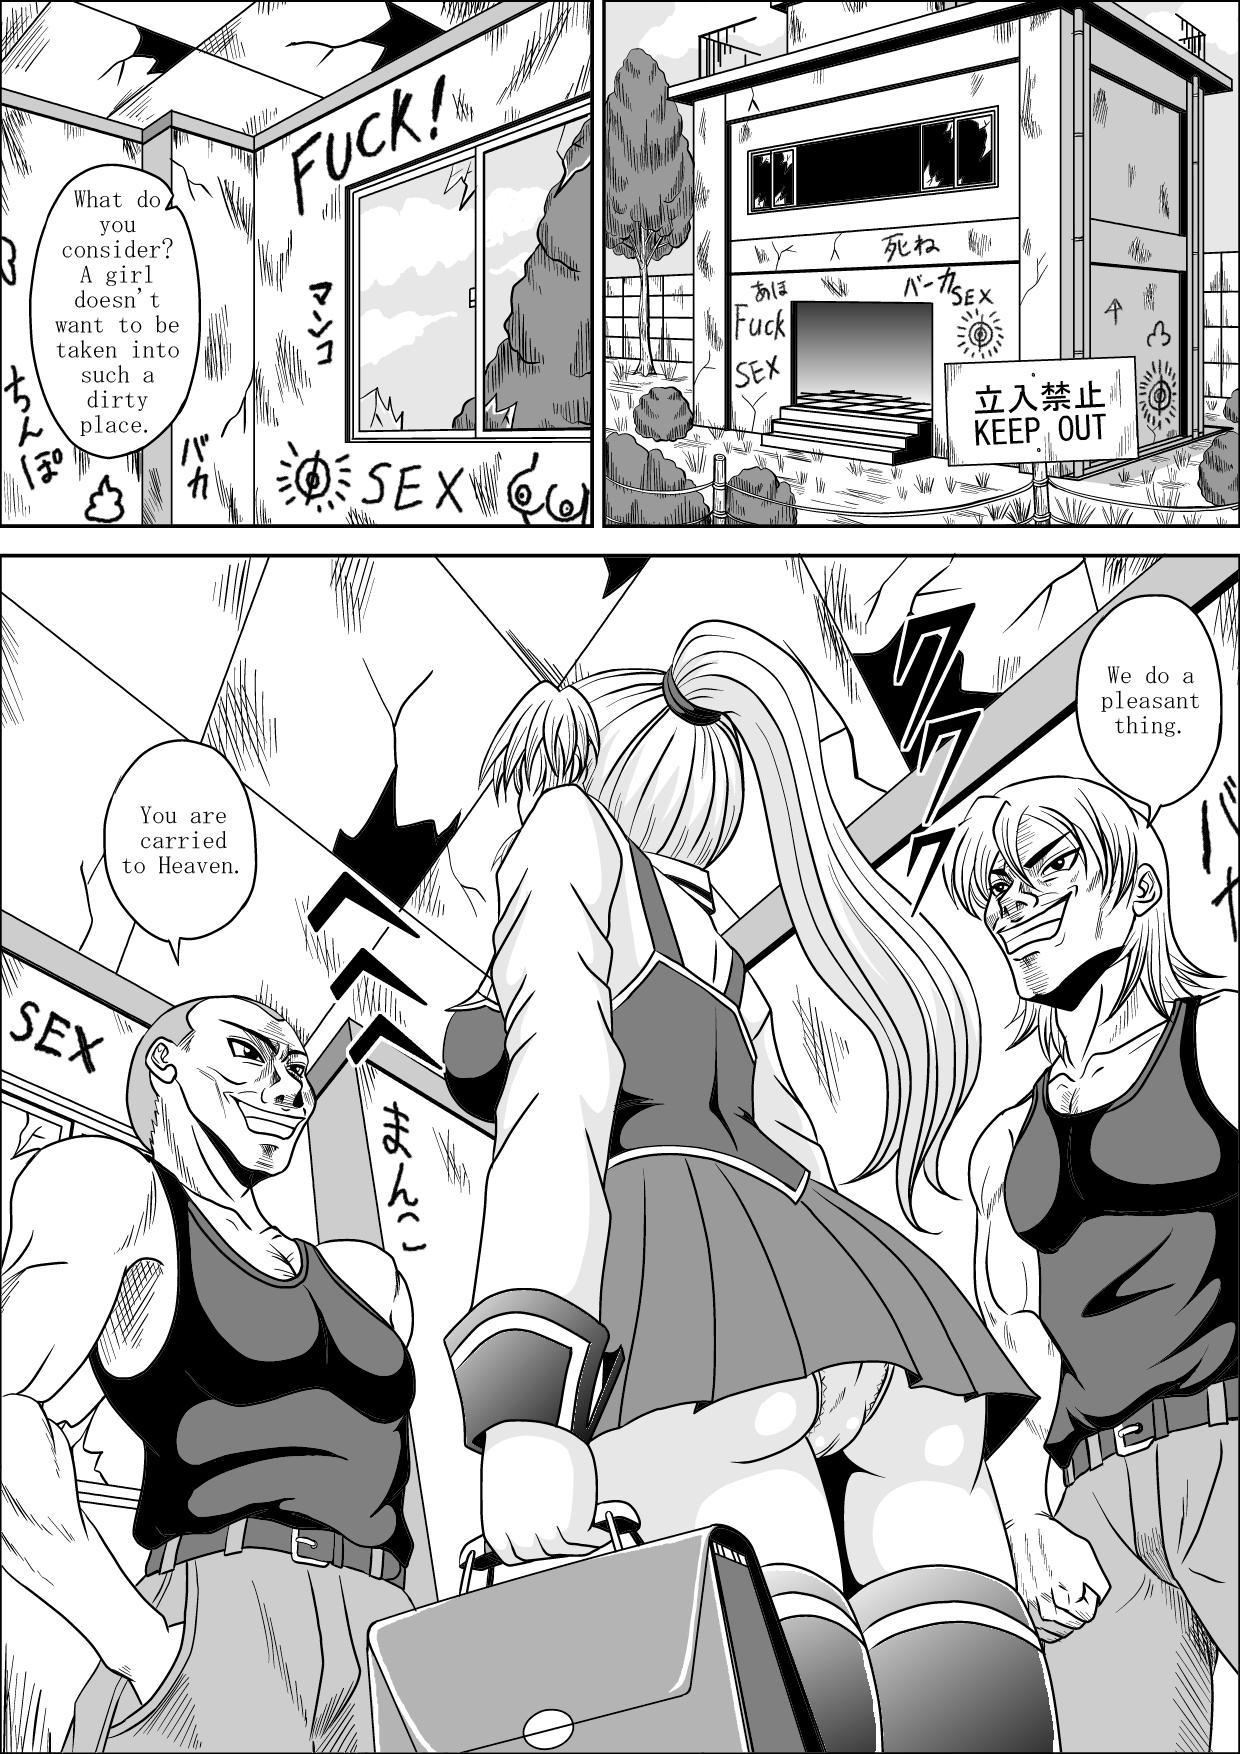 Twerking Little Witch Fuck! - Bible black Panty - Page 3